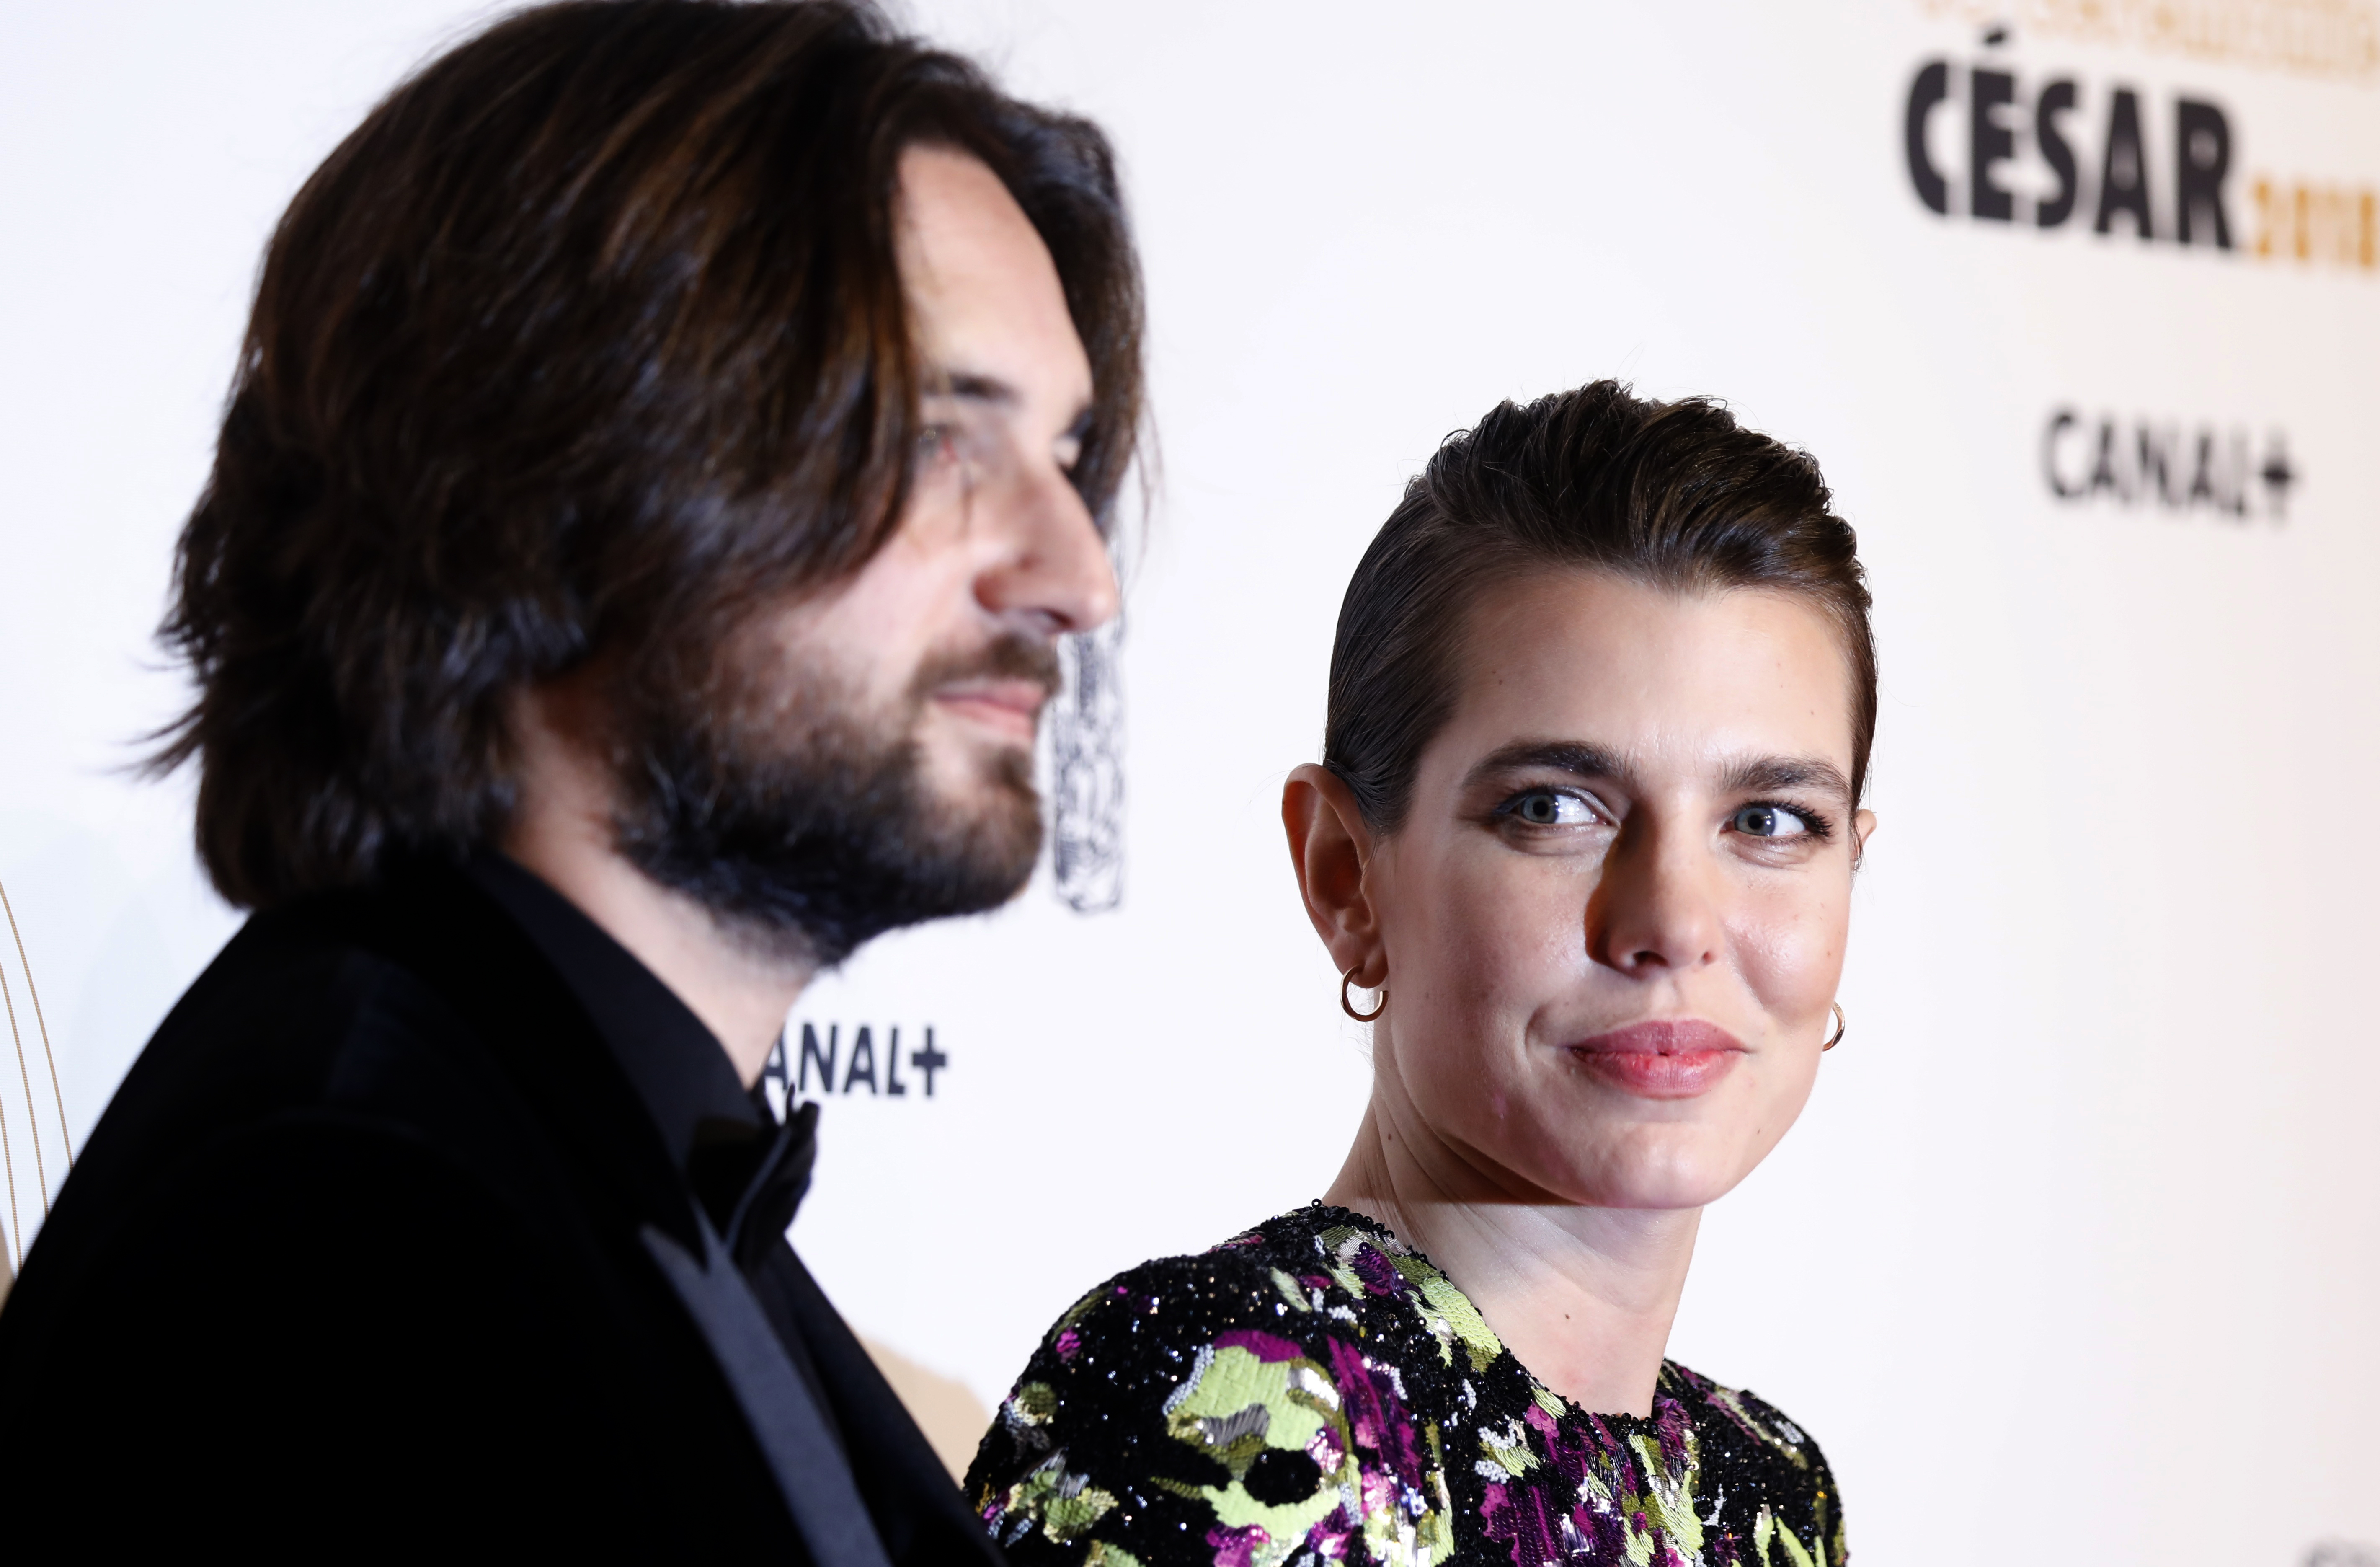 43rd Cesar Awards ceremony - Red Carpet Arrivals - Paris, France. 02/03/2018.  Charlotte Casiraghi and her partner Dimitri Rassam pose before the start of the ceremony. REUTERS/Charles Platiau - UP1EE321N4S9Y